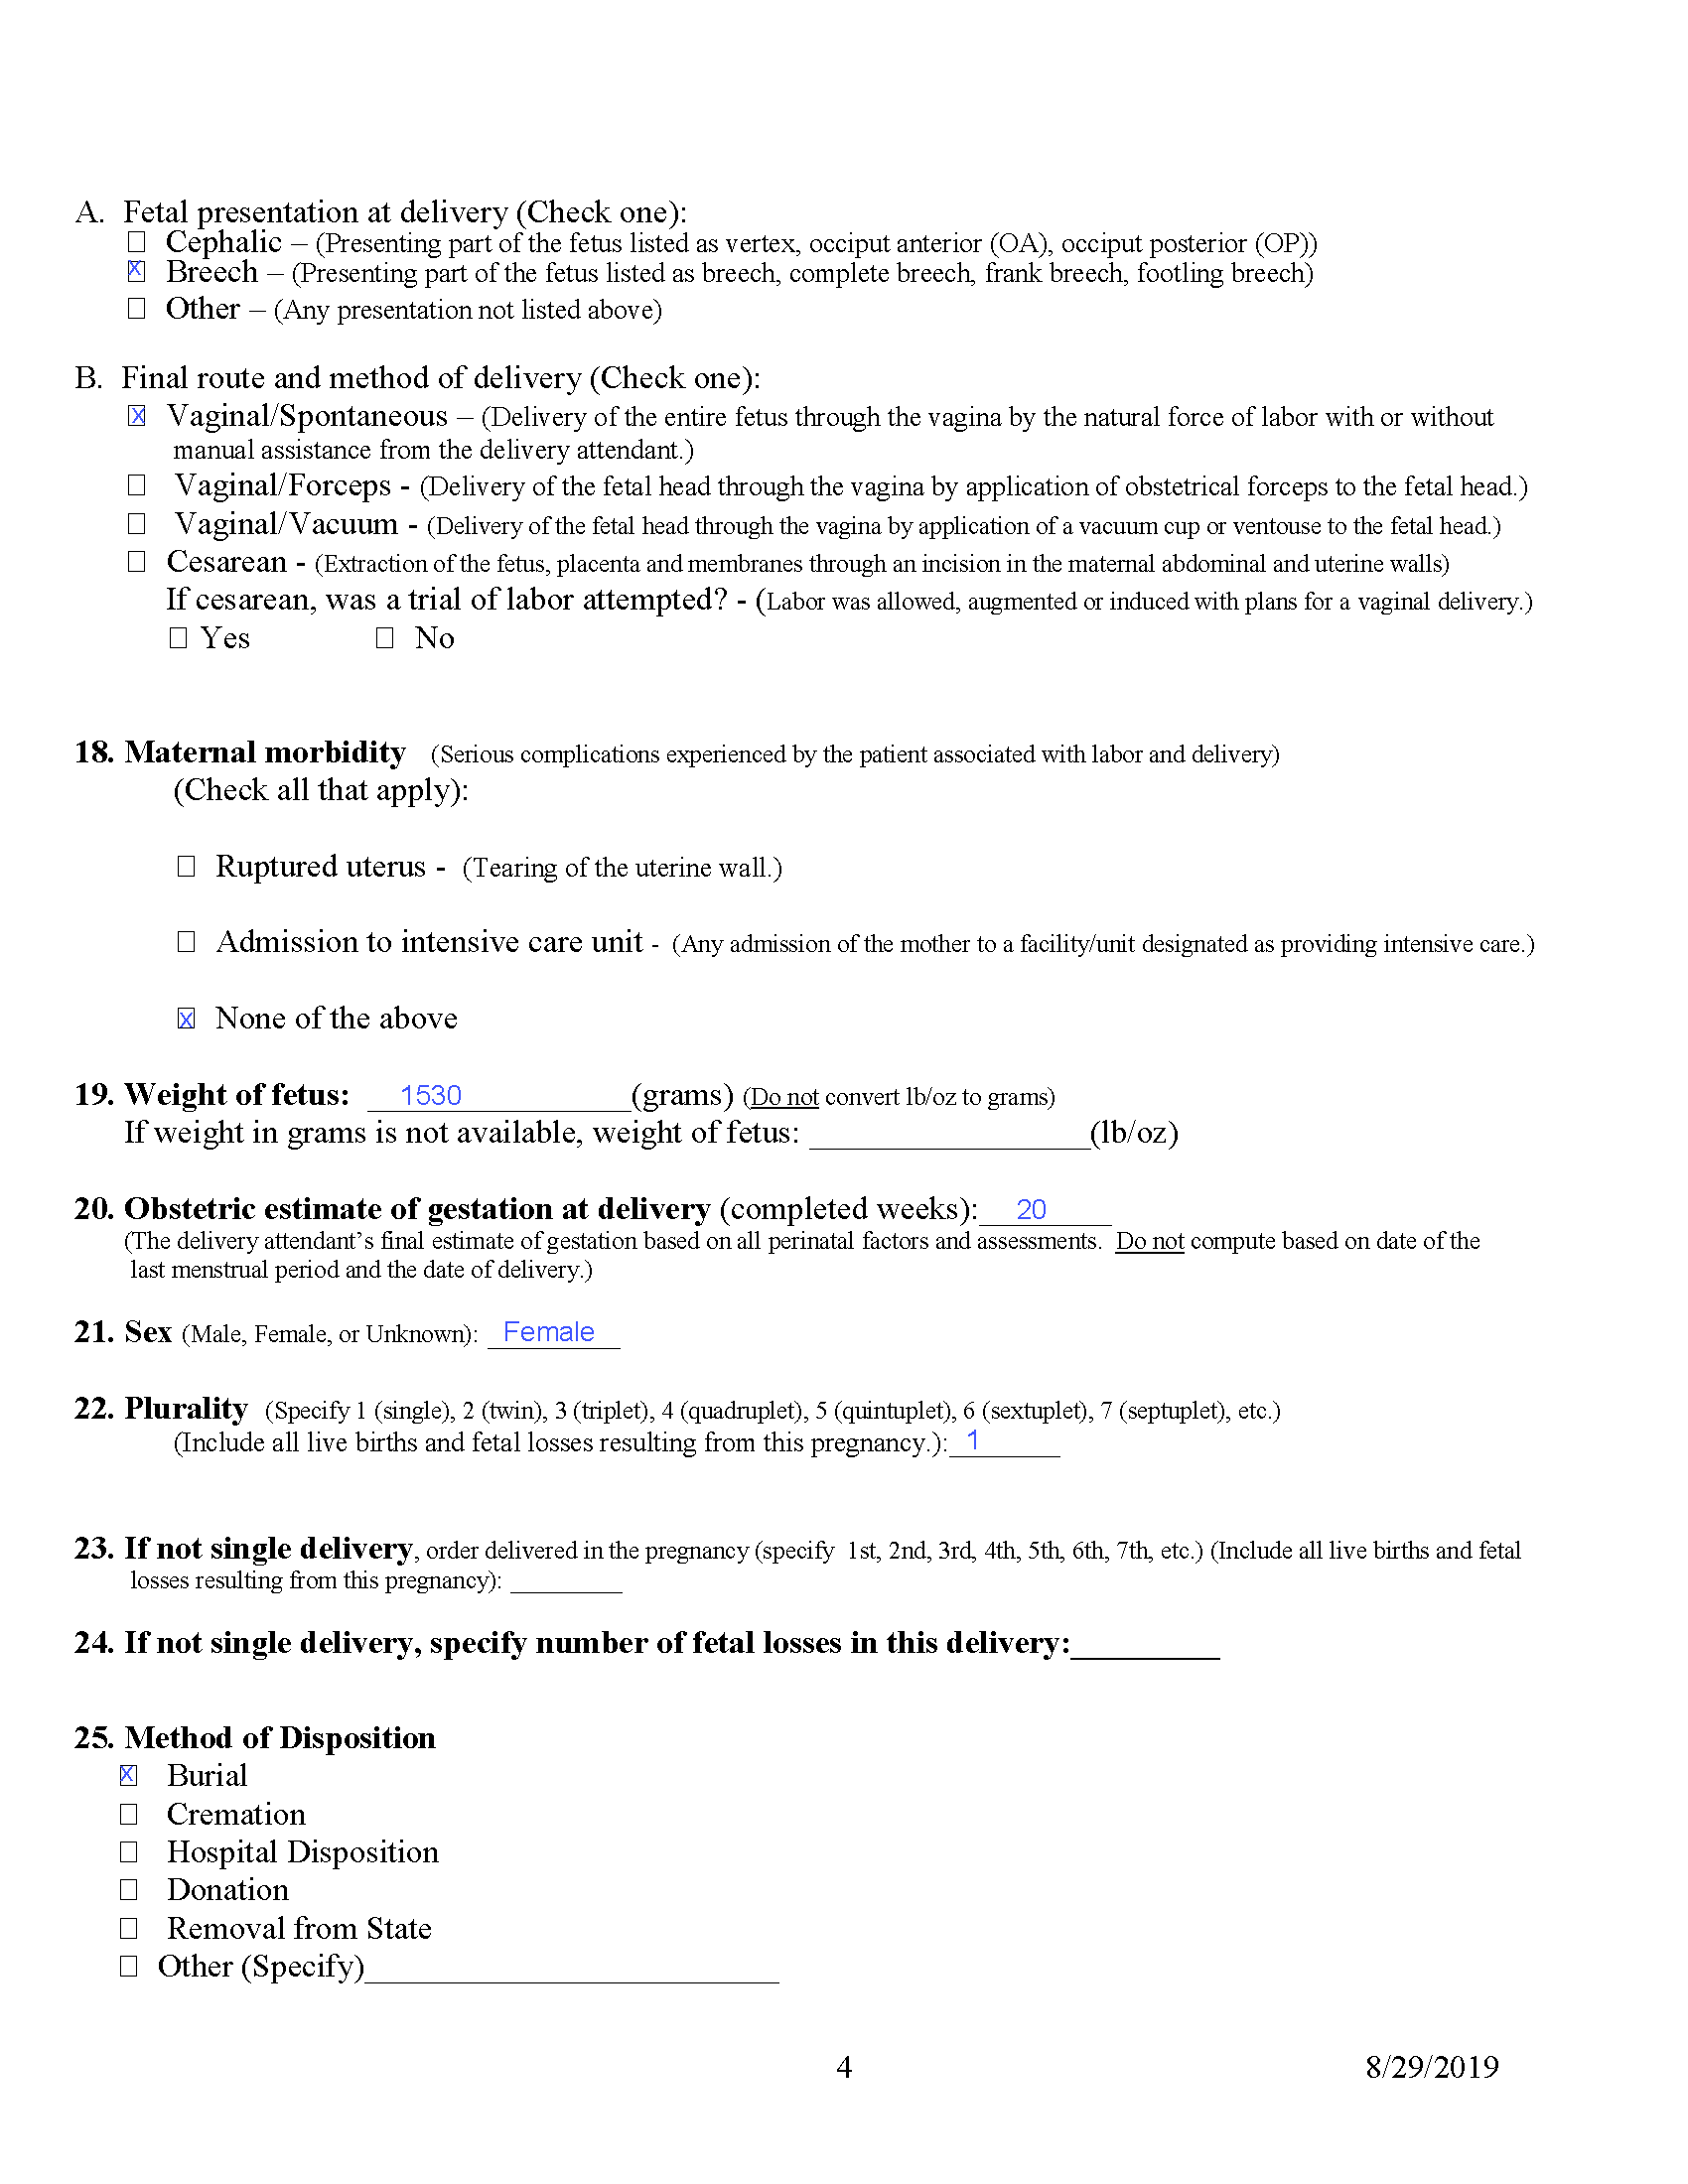 Example Facility Worksheet for Fetal Death Report - p4